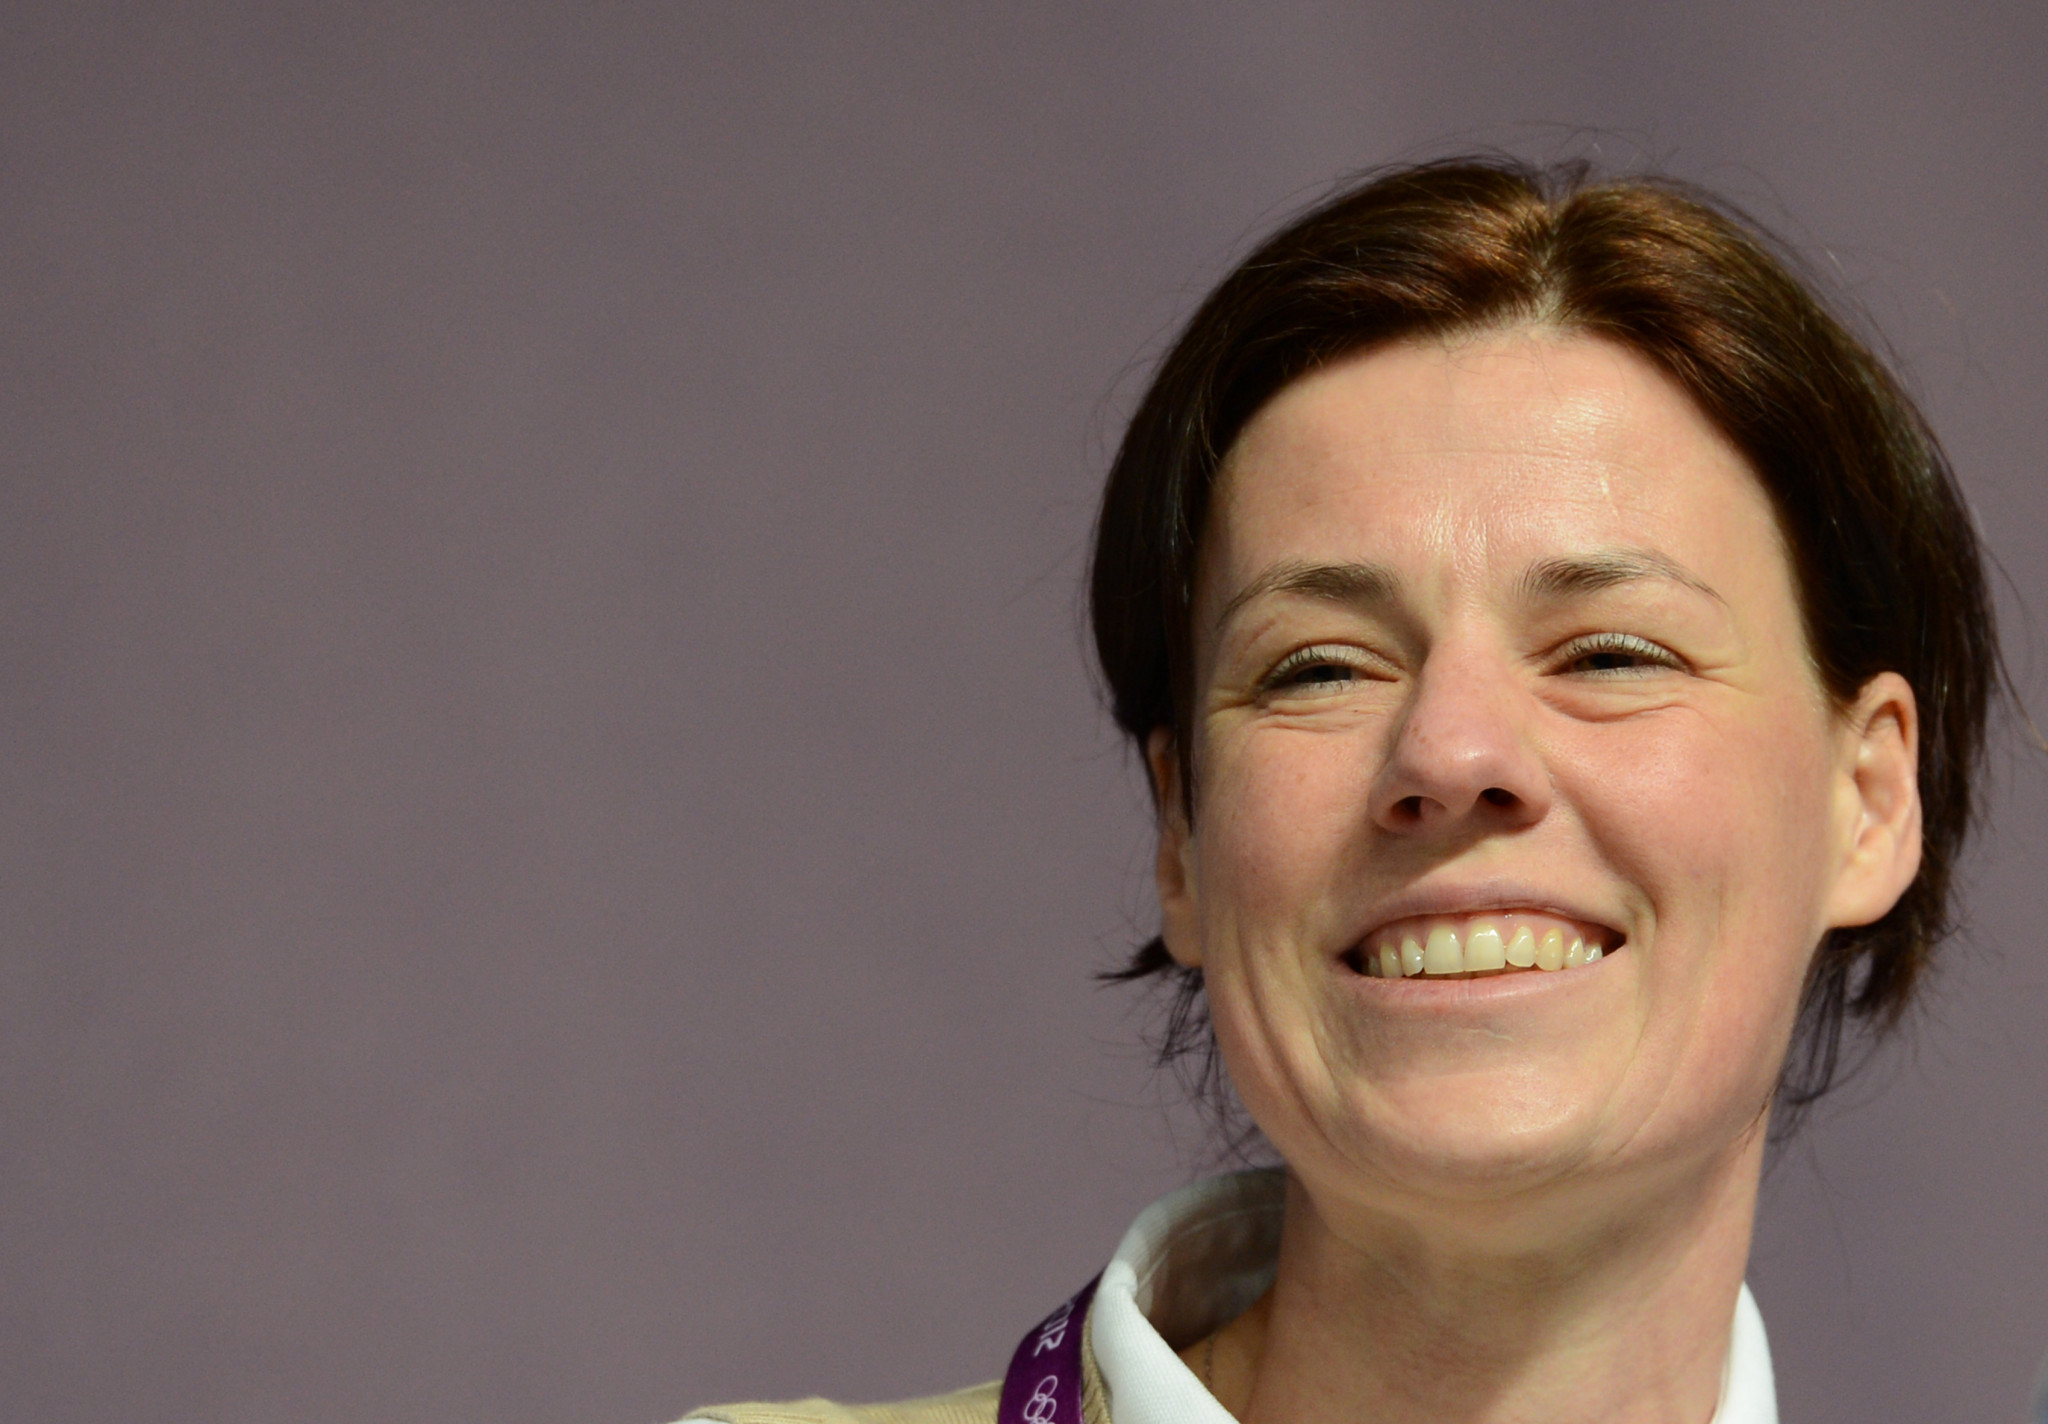 DFB President and former IOC member Claudia Bokel said the national governing body 